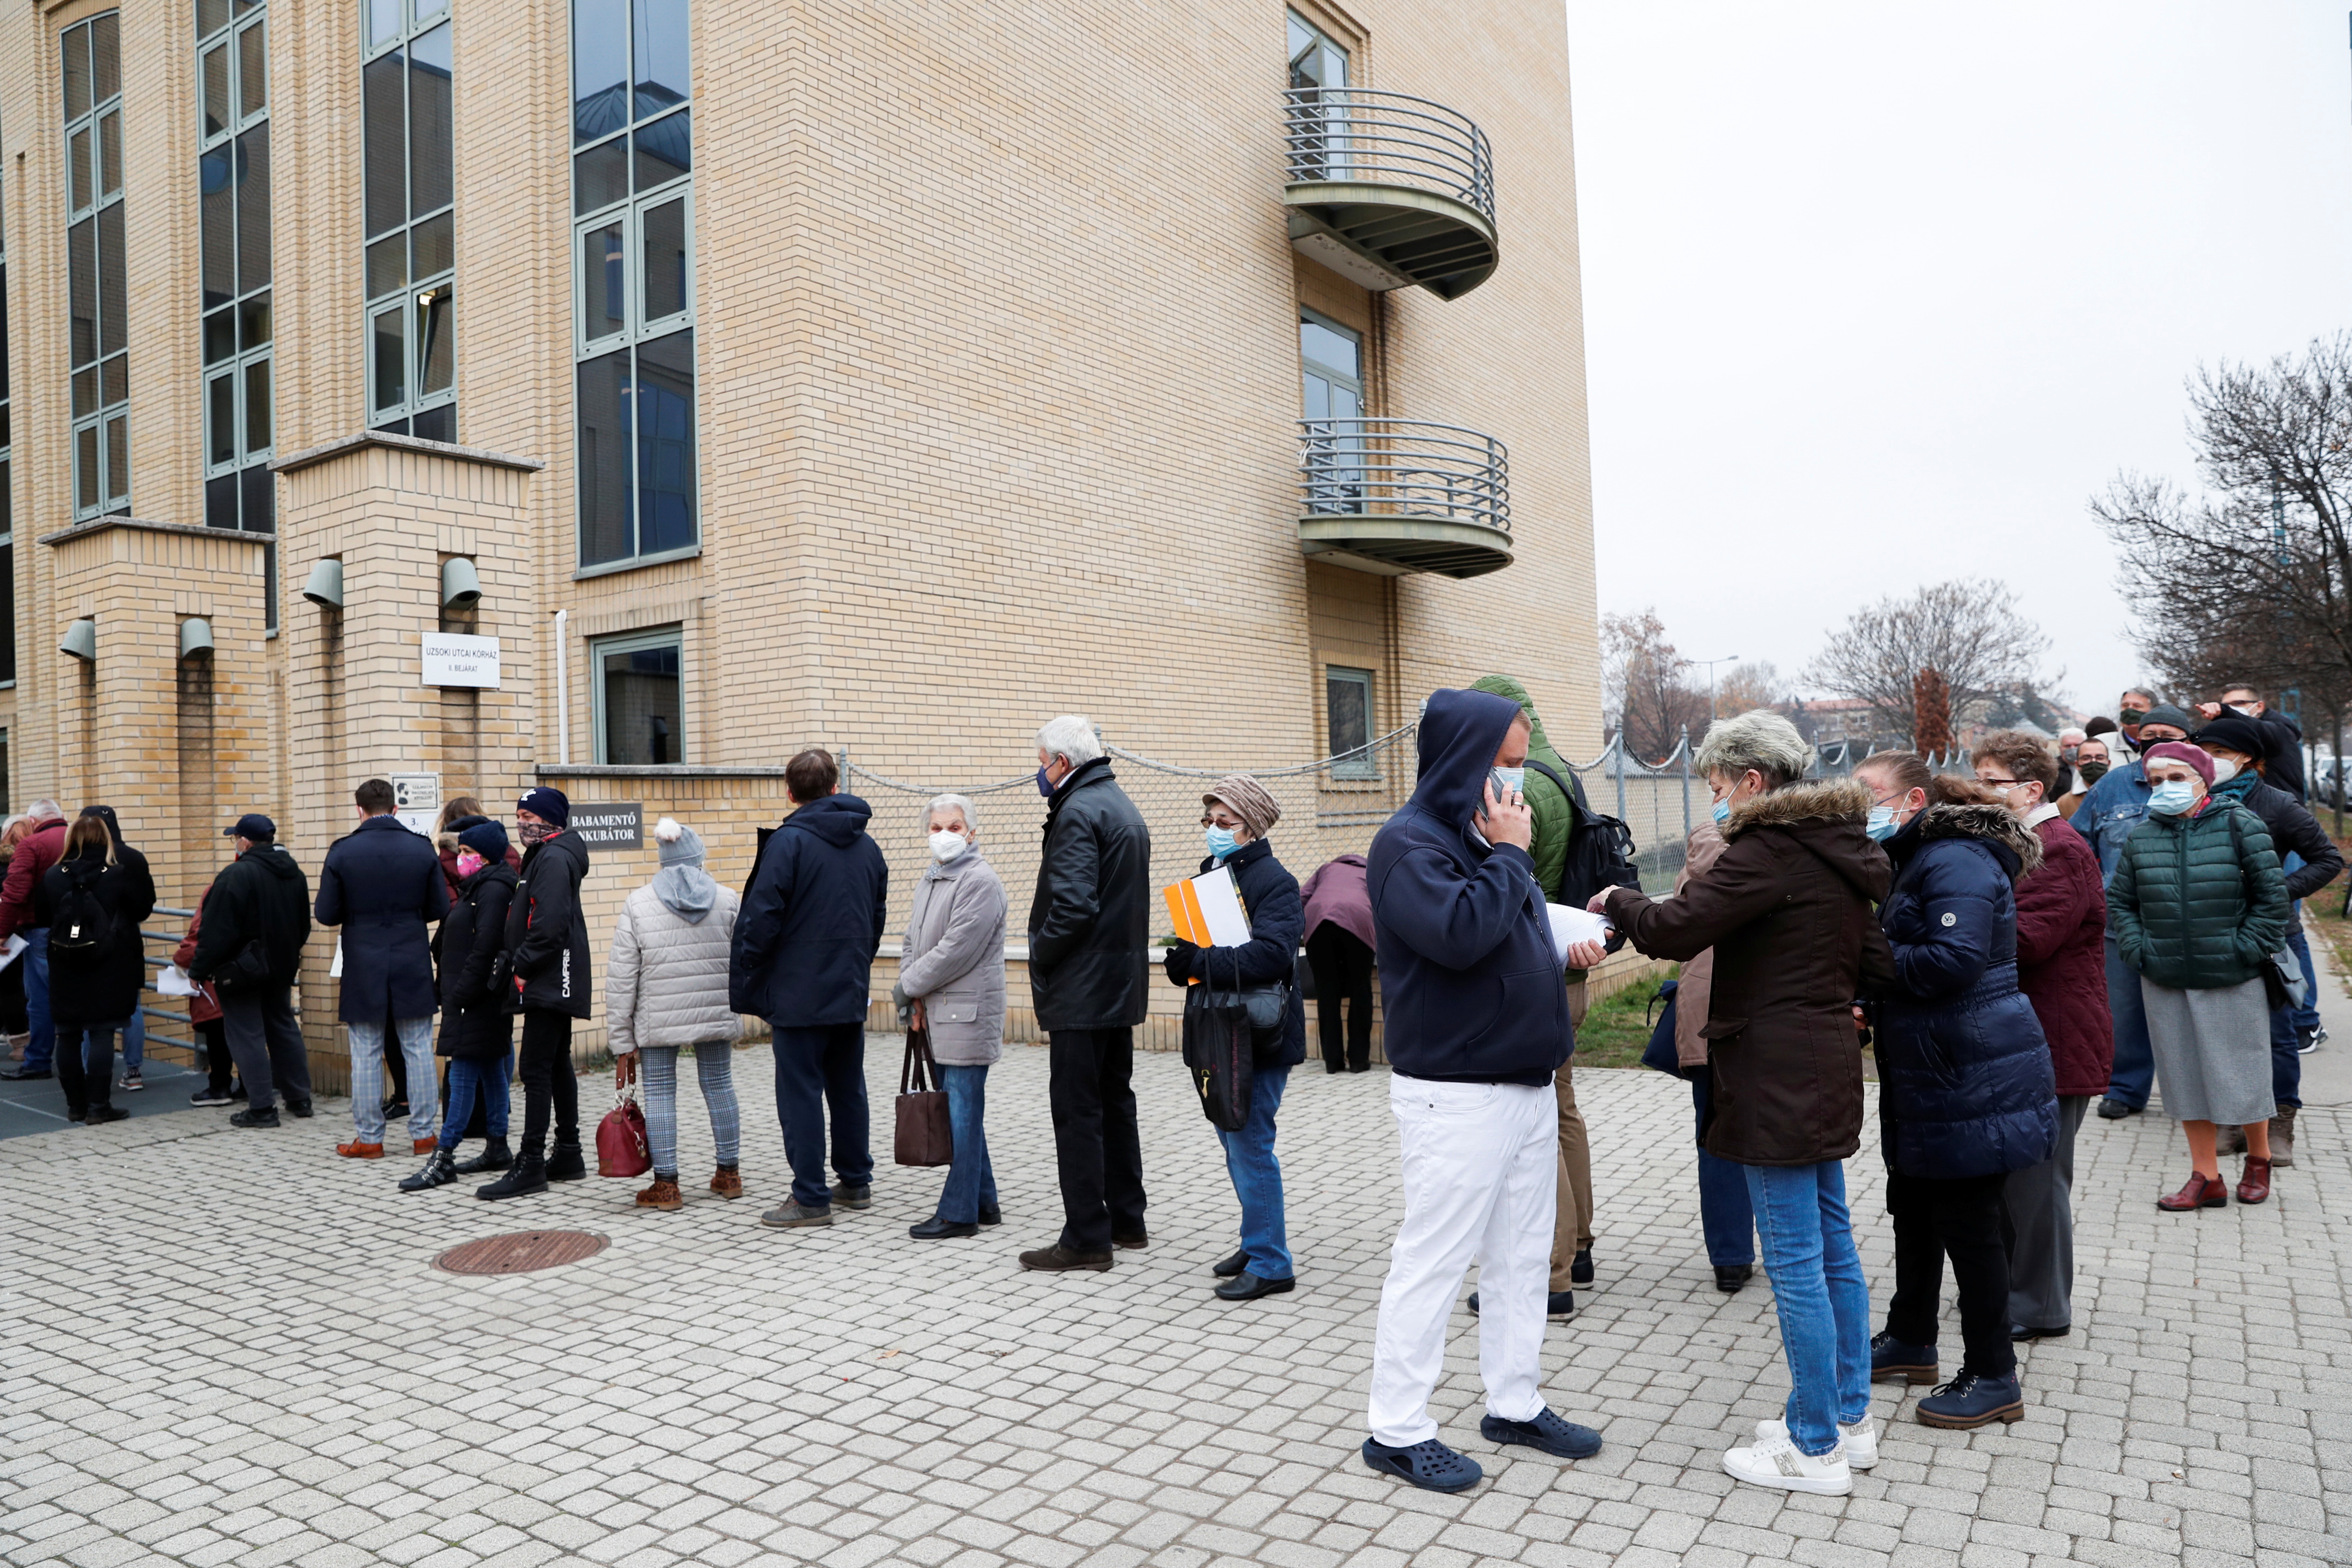 People stand in a queue for vaccination in front of a hospital as the spread of the coronavirus disease (COVID-19) continues, in Budapest, Hungary, November 22, 2021. REUTERS/Bernadett Szabo